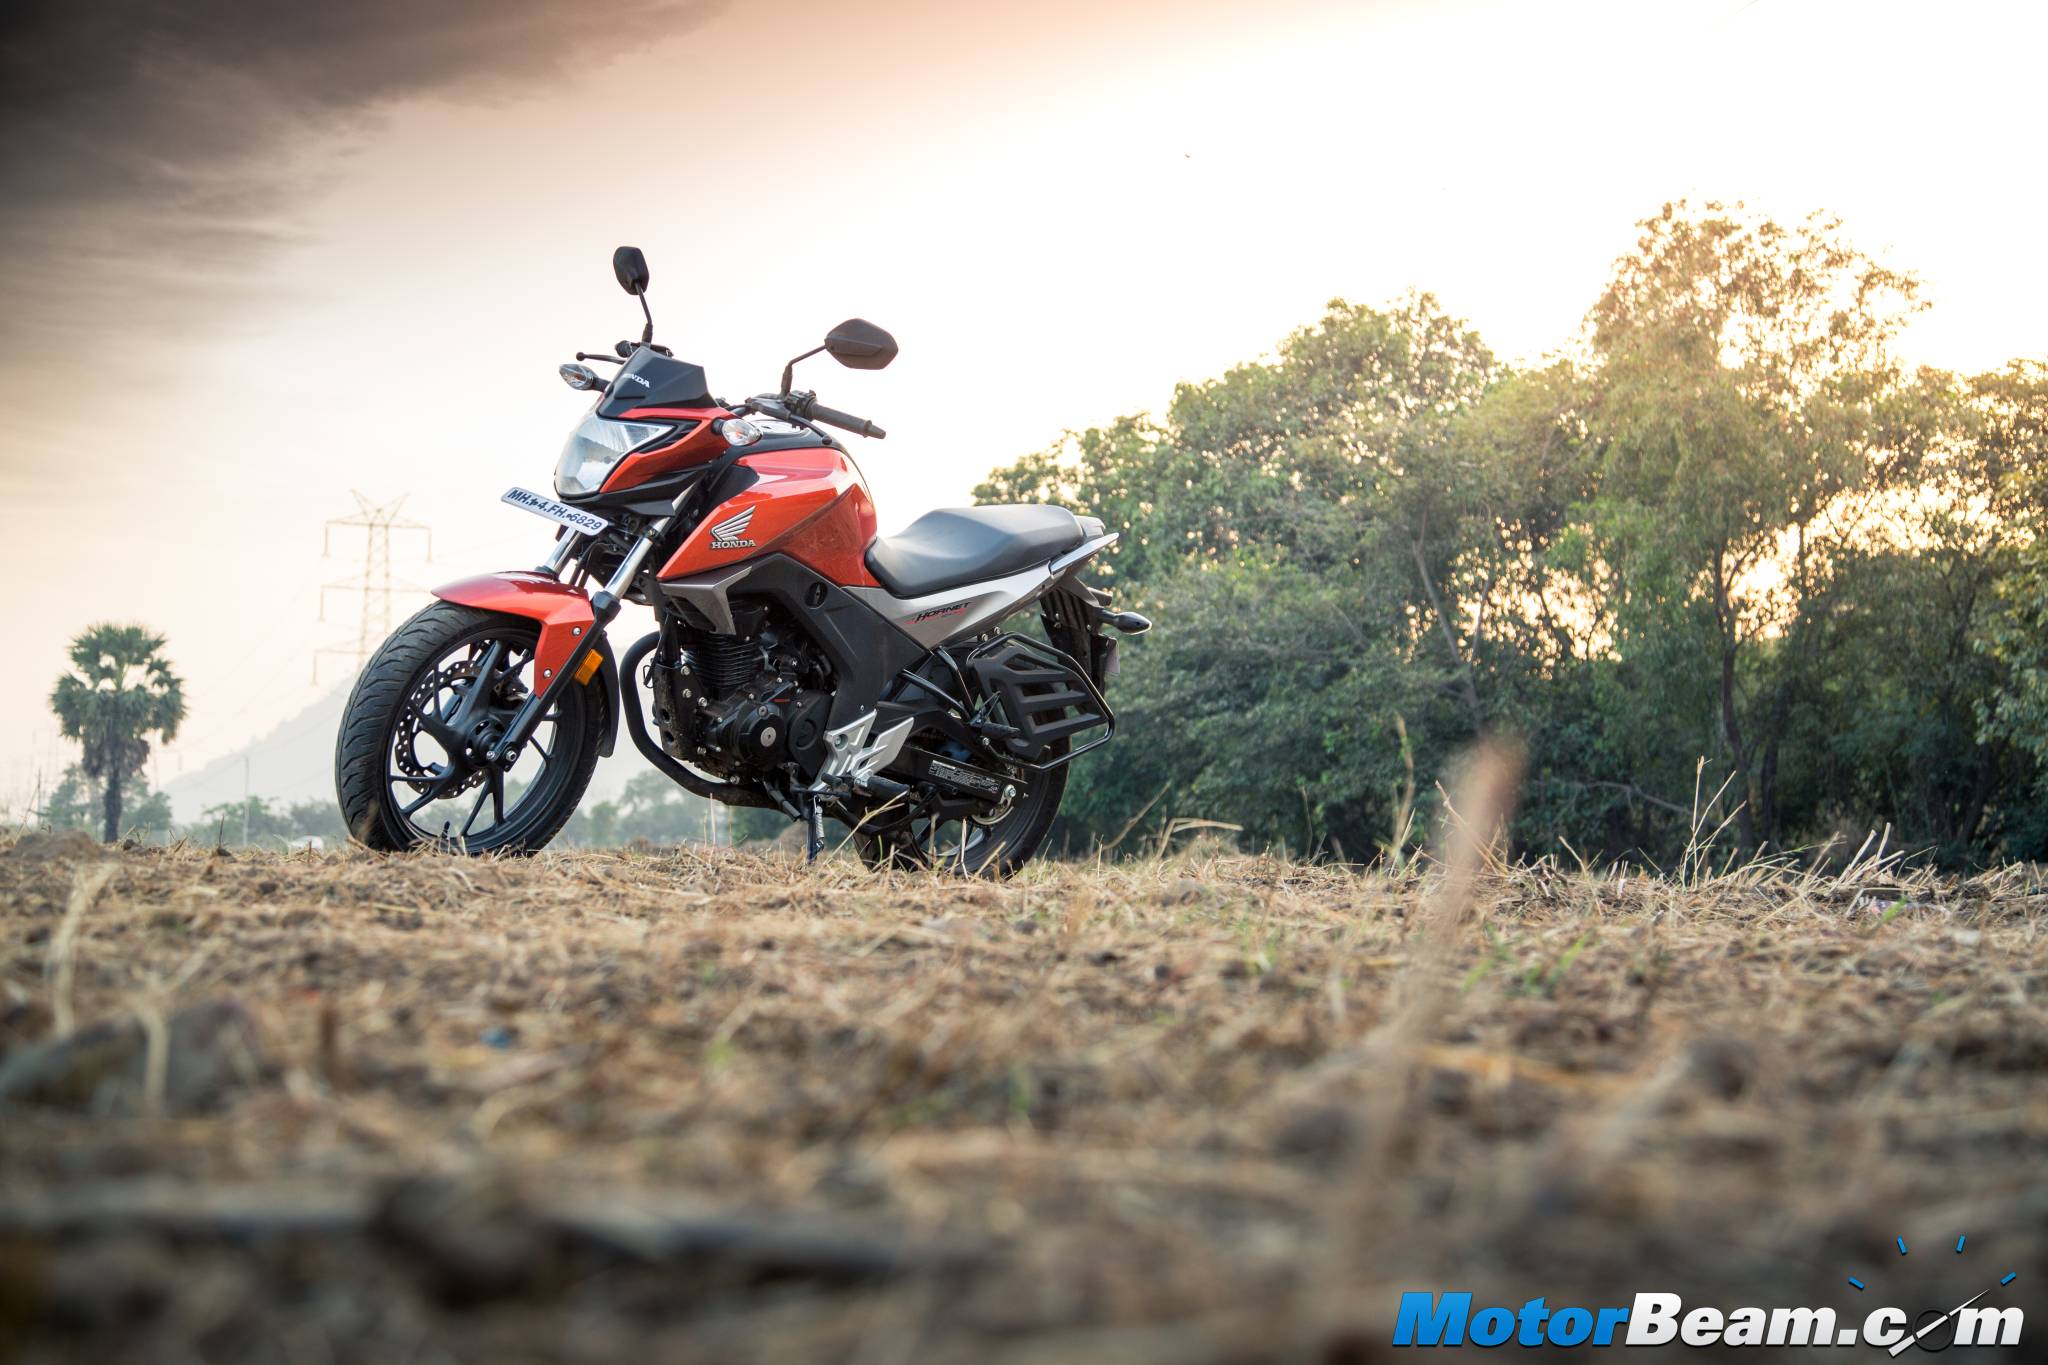 150cc Bike Sales In January 2016, Hornet Grows Significantly | MotorBeam